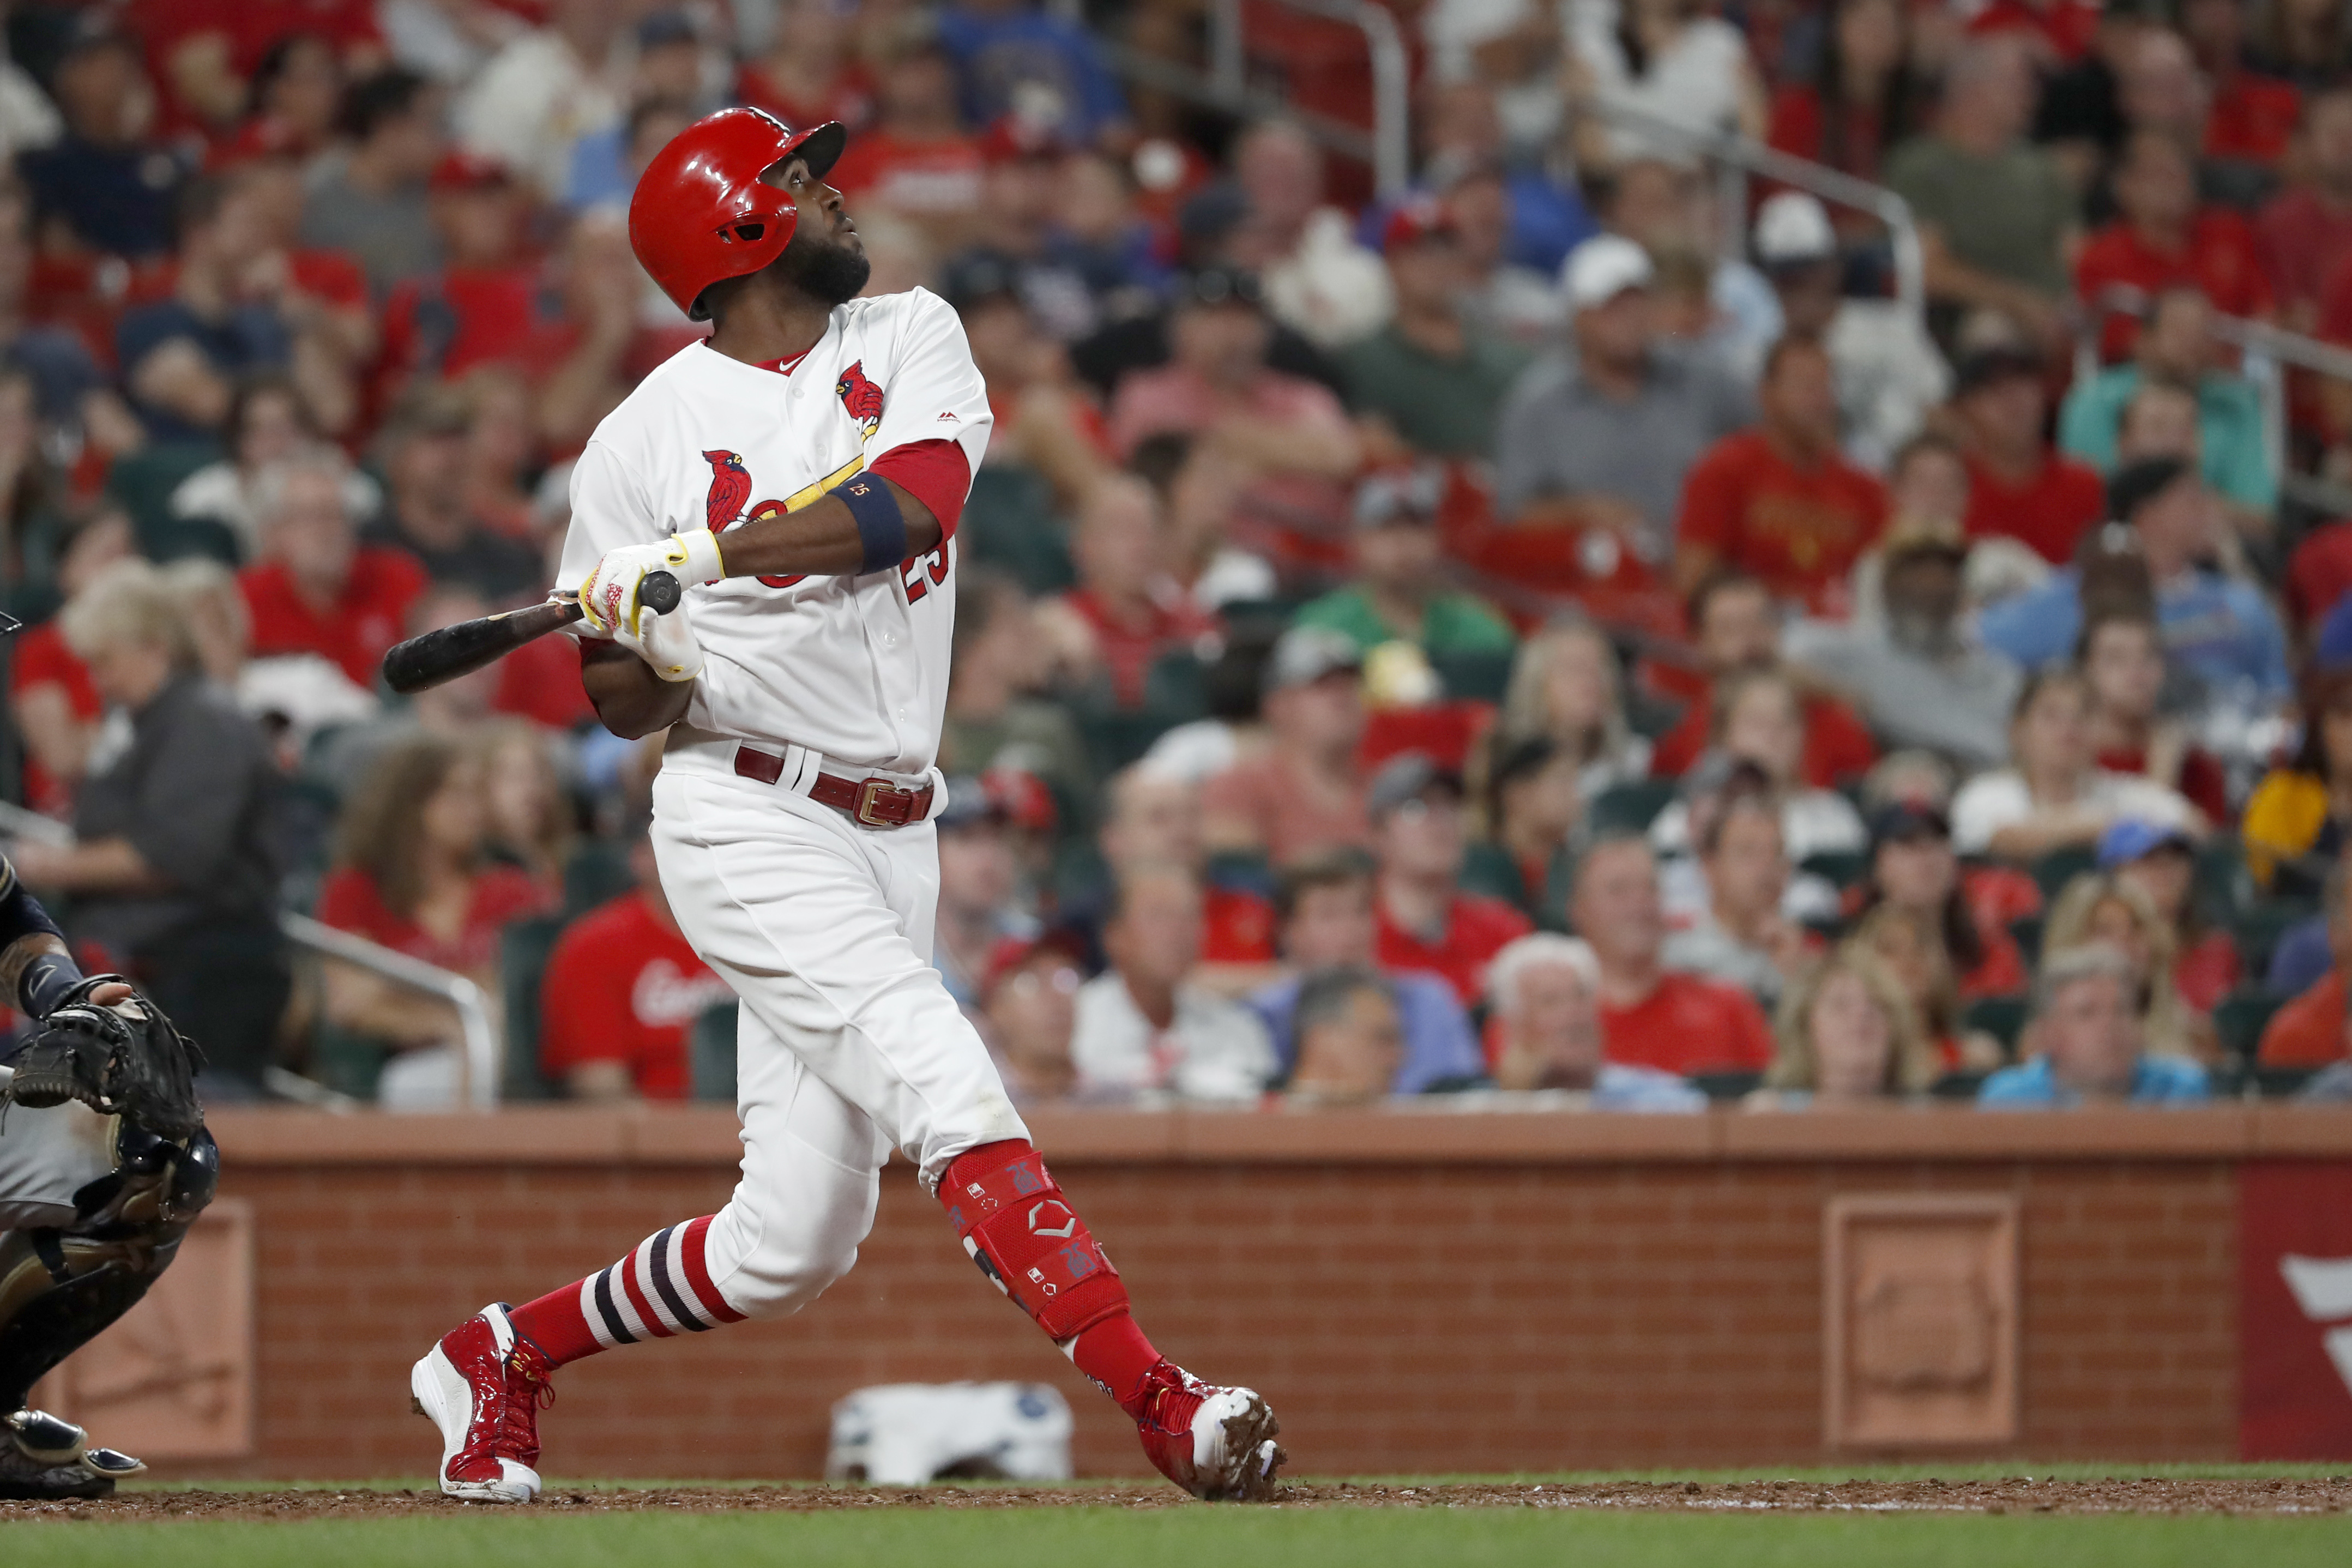 Fowler drives in 4 runs in Cardinals 9-2 win over Brewers